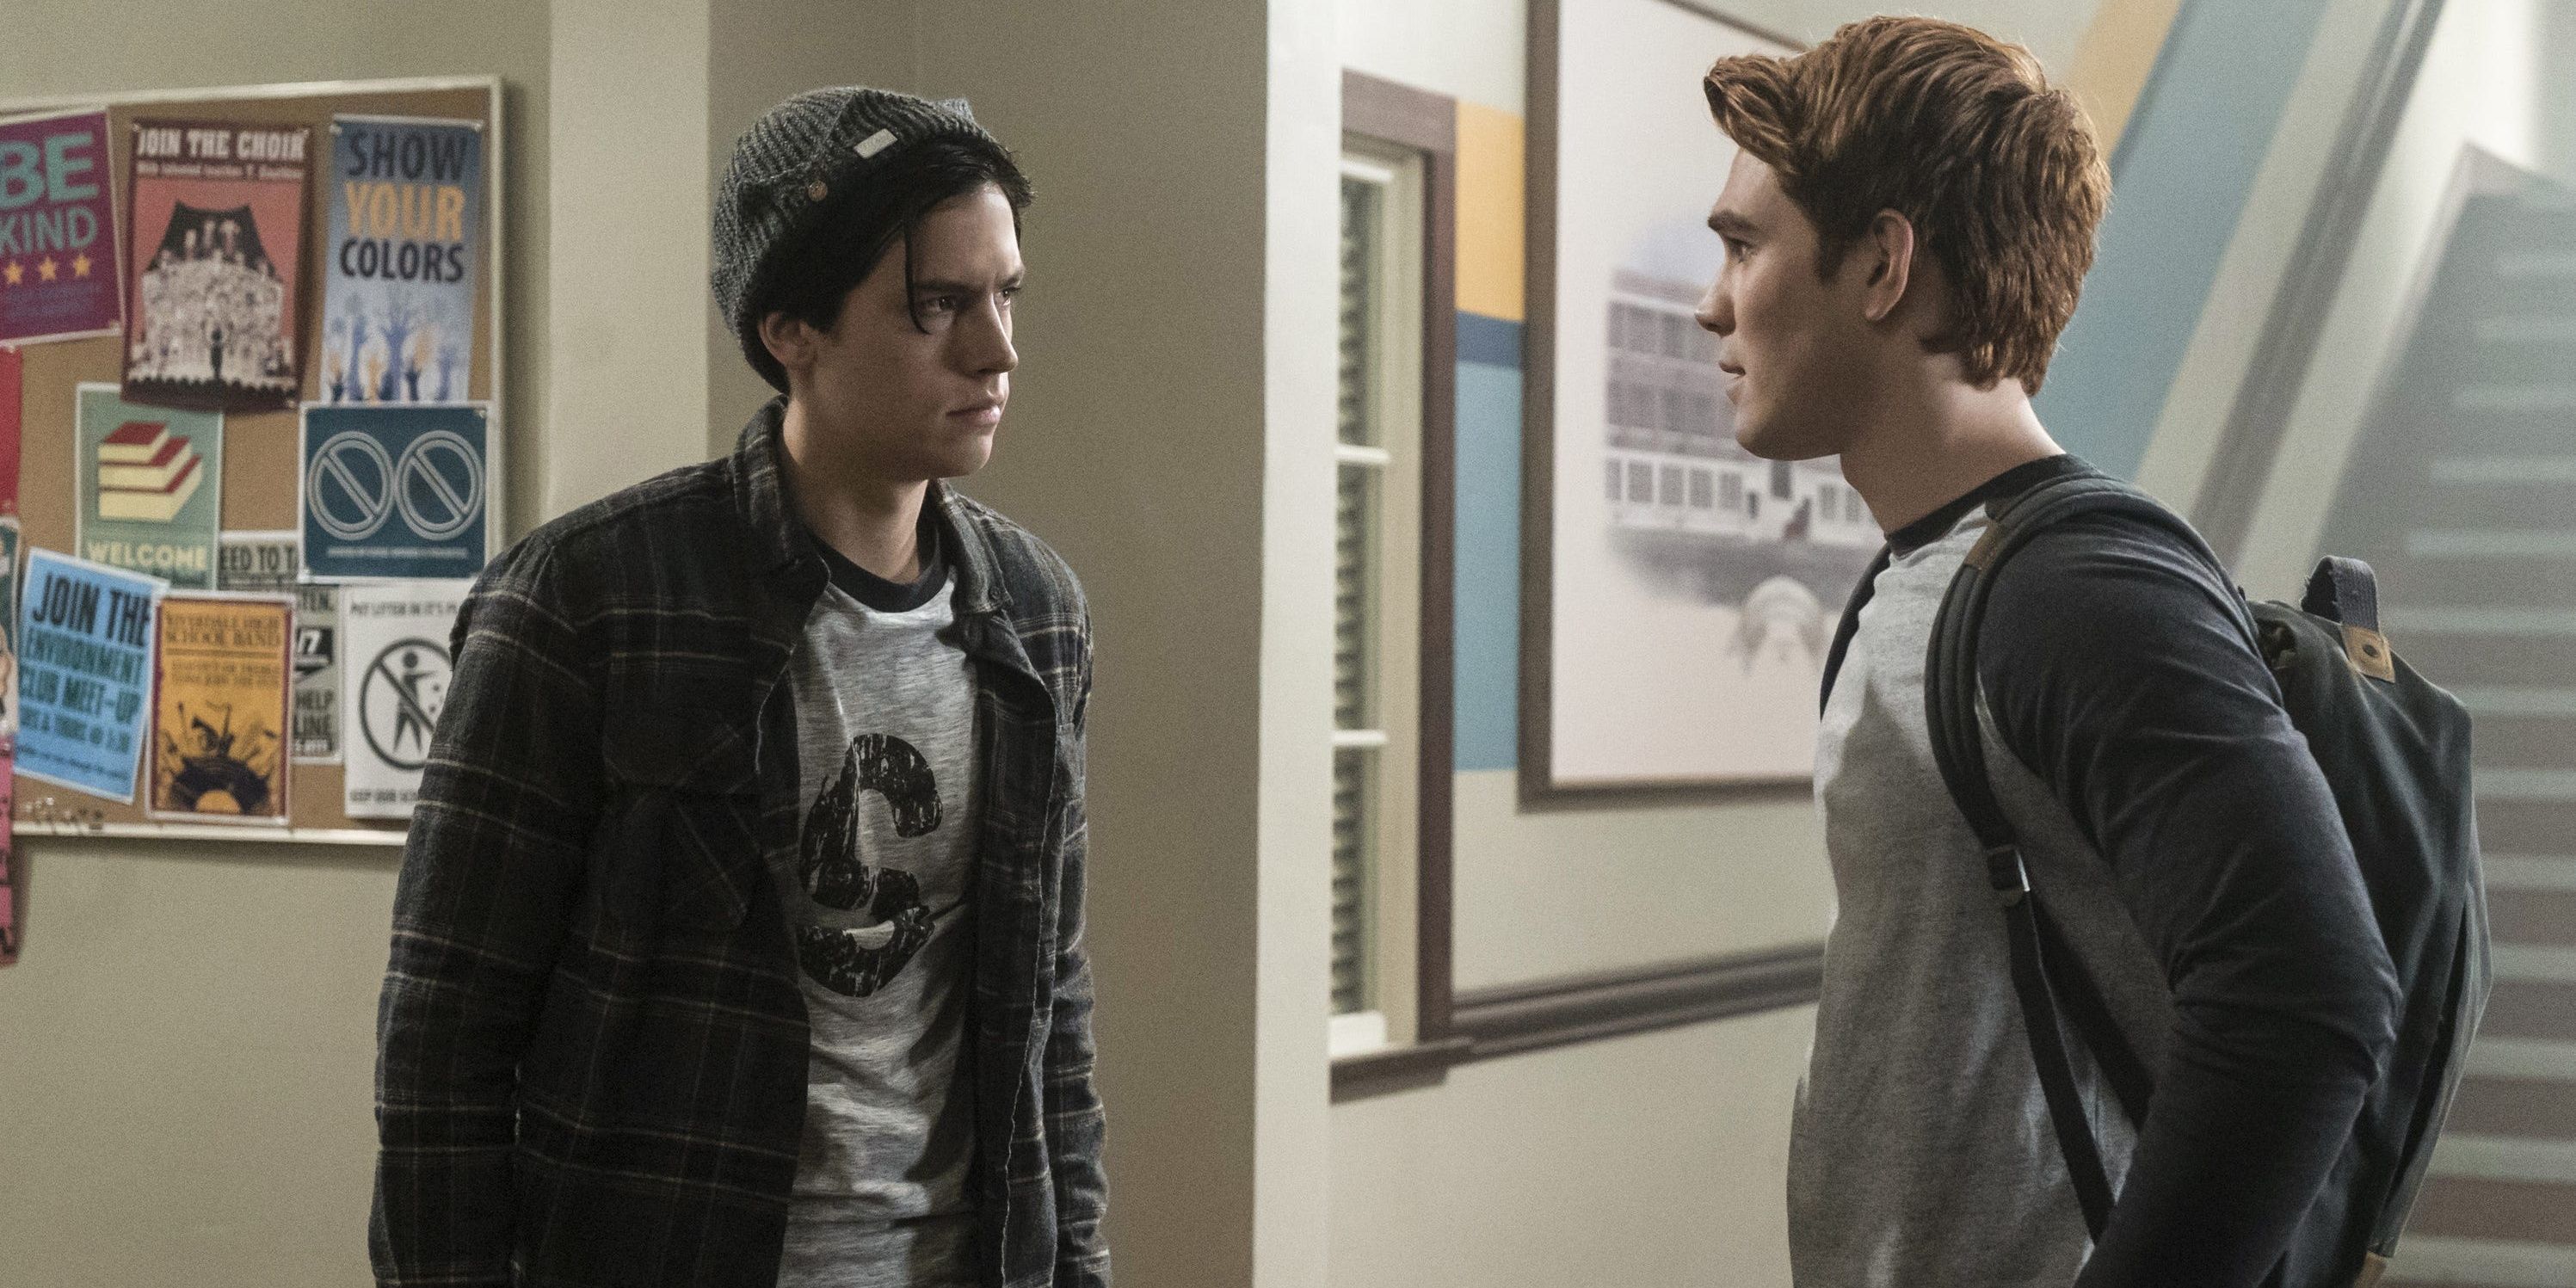 Archie and Jughead face tof ace in a school halllway